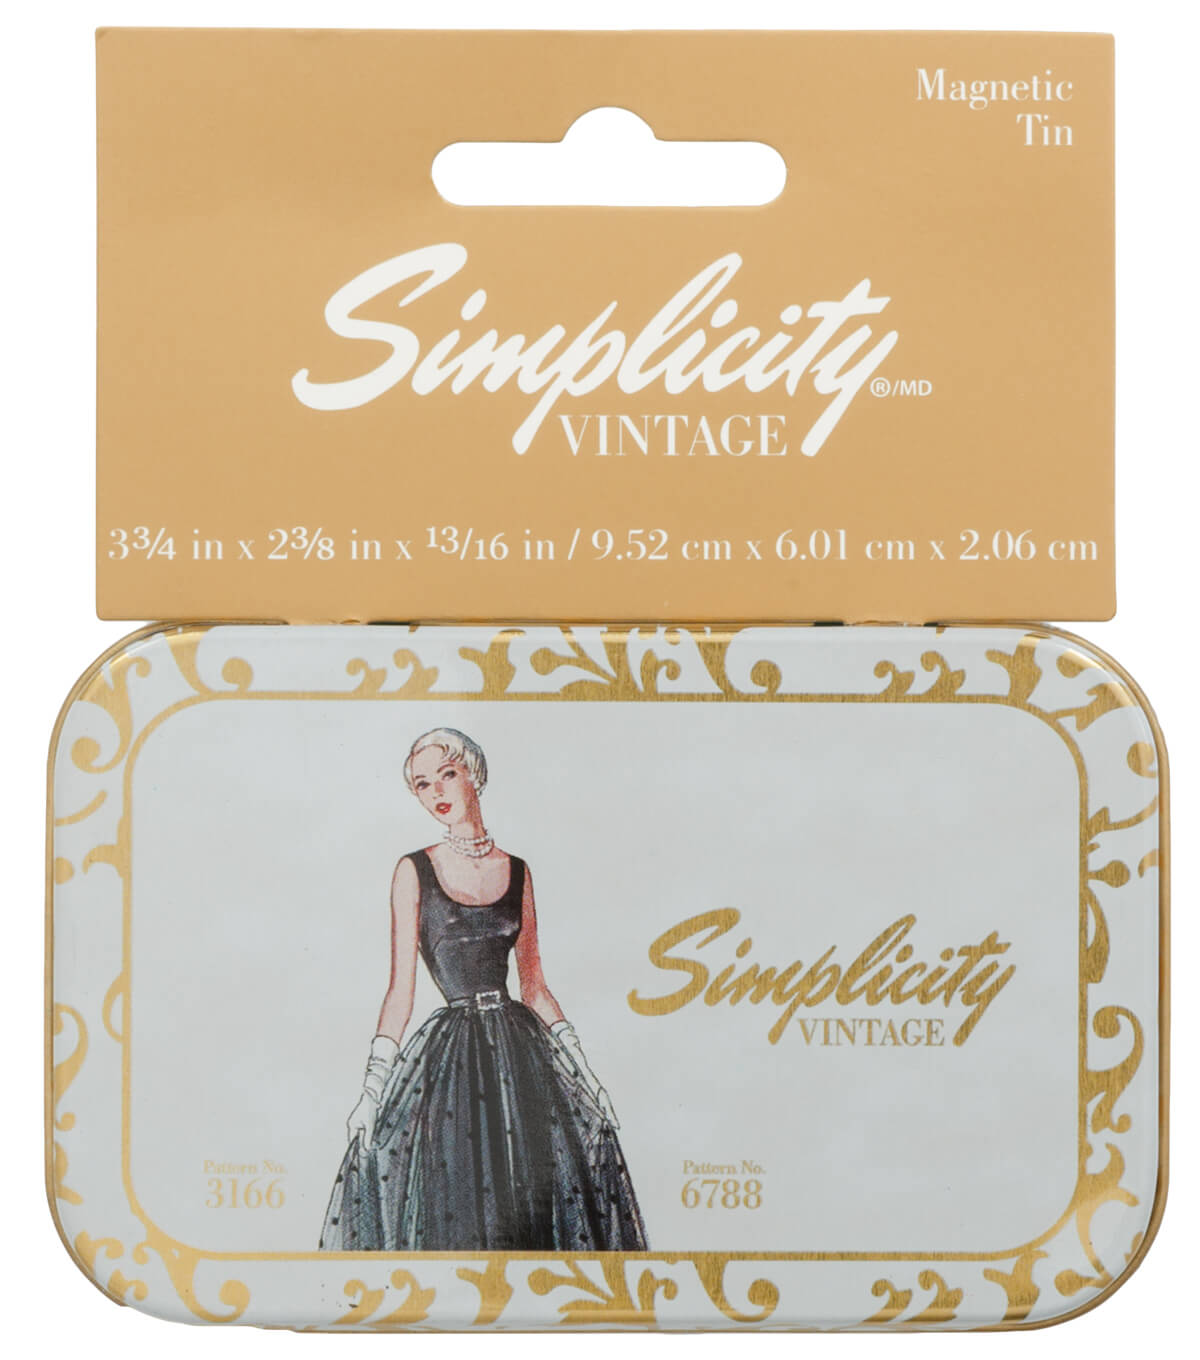 SIMPLICITY VINTAGE MAGNETIC NOTIONS TIN - PATTERNED